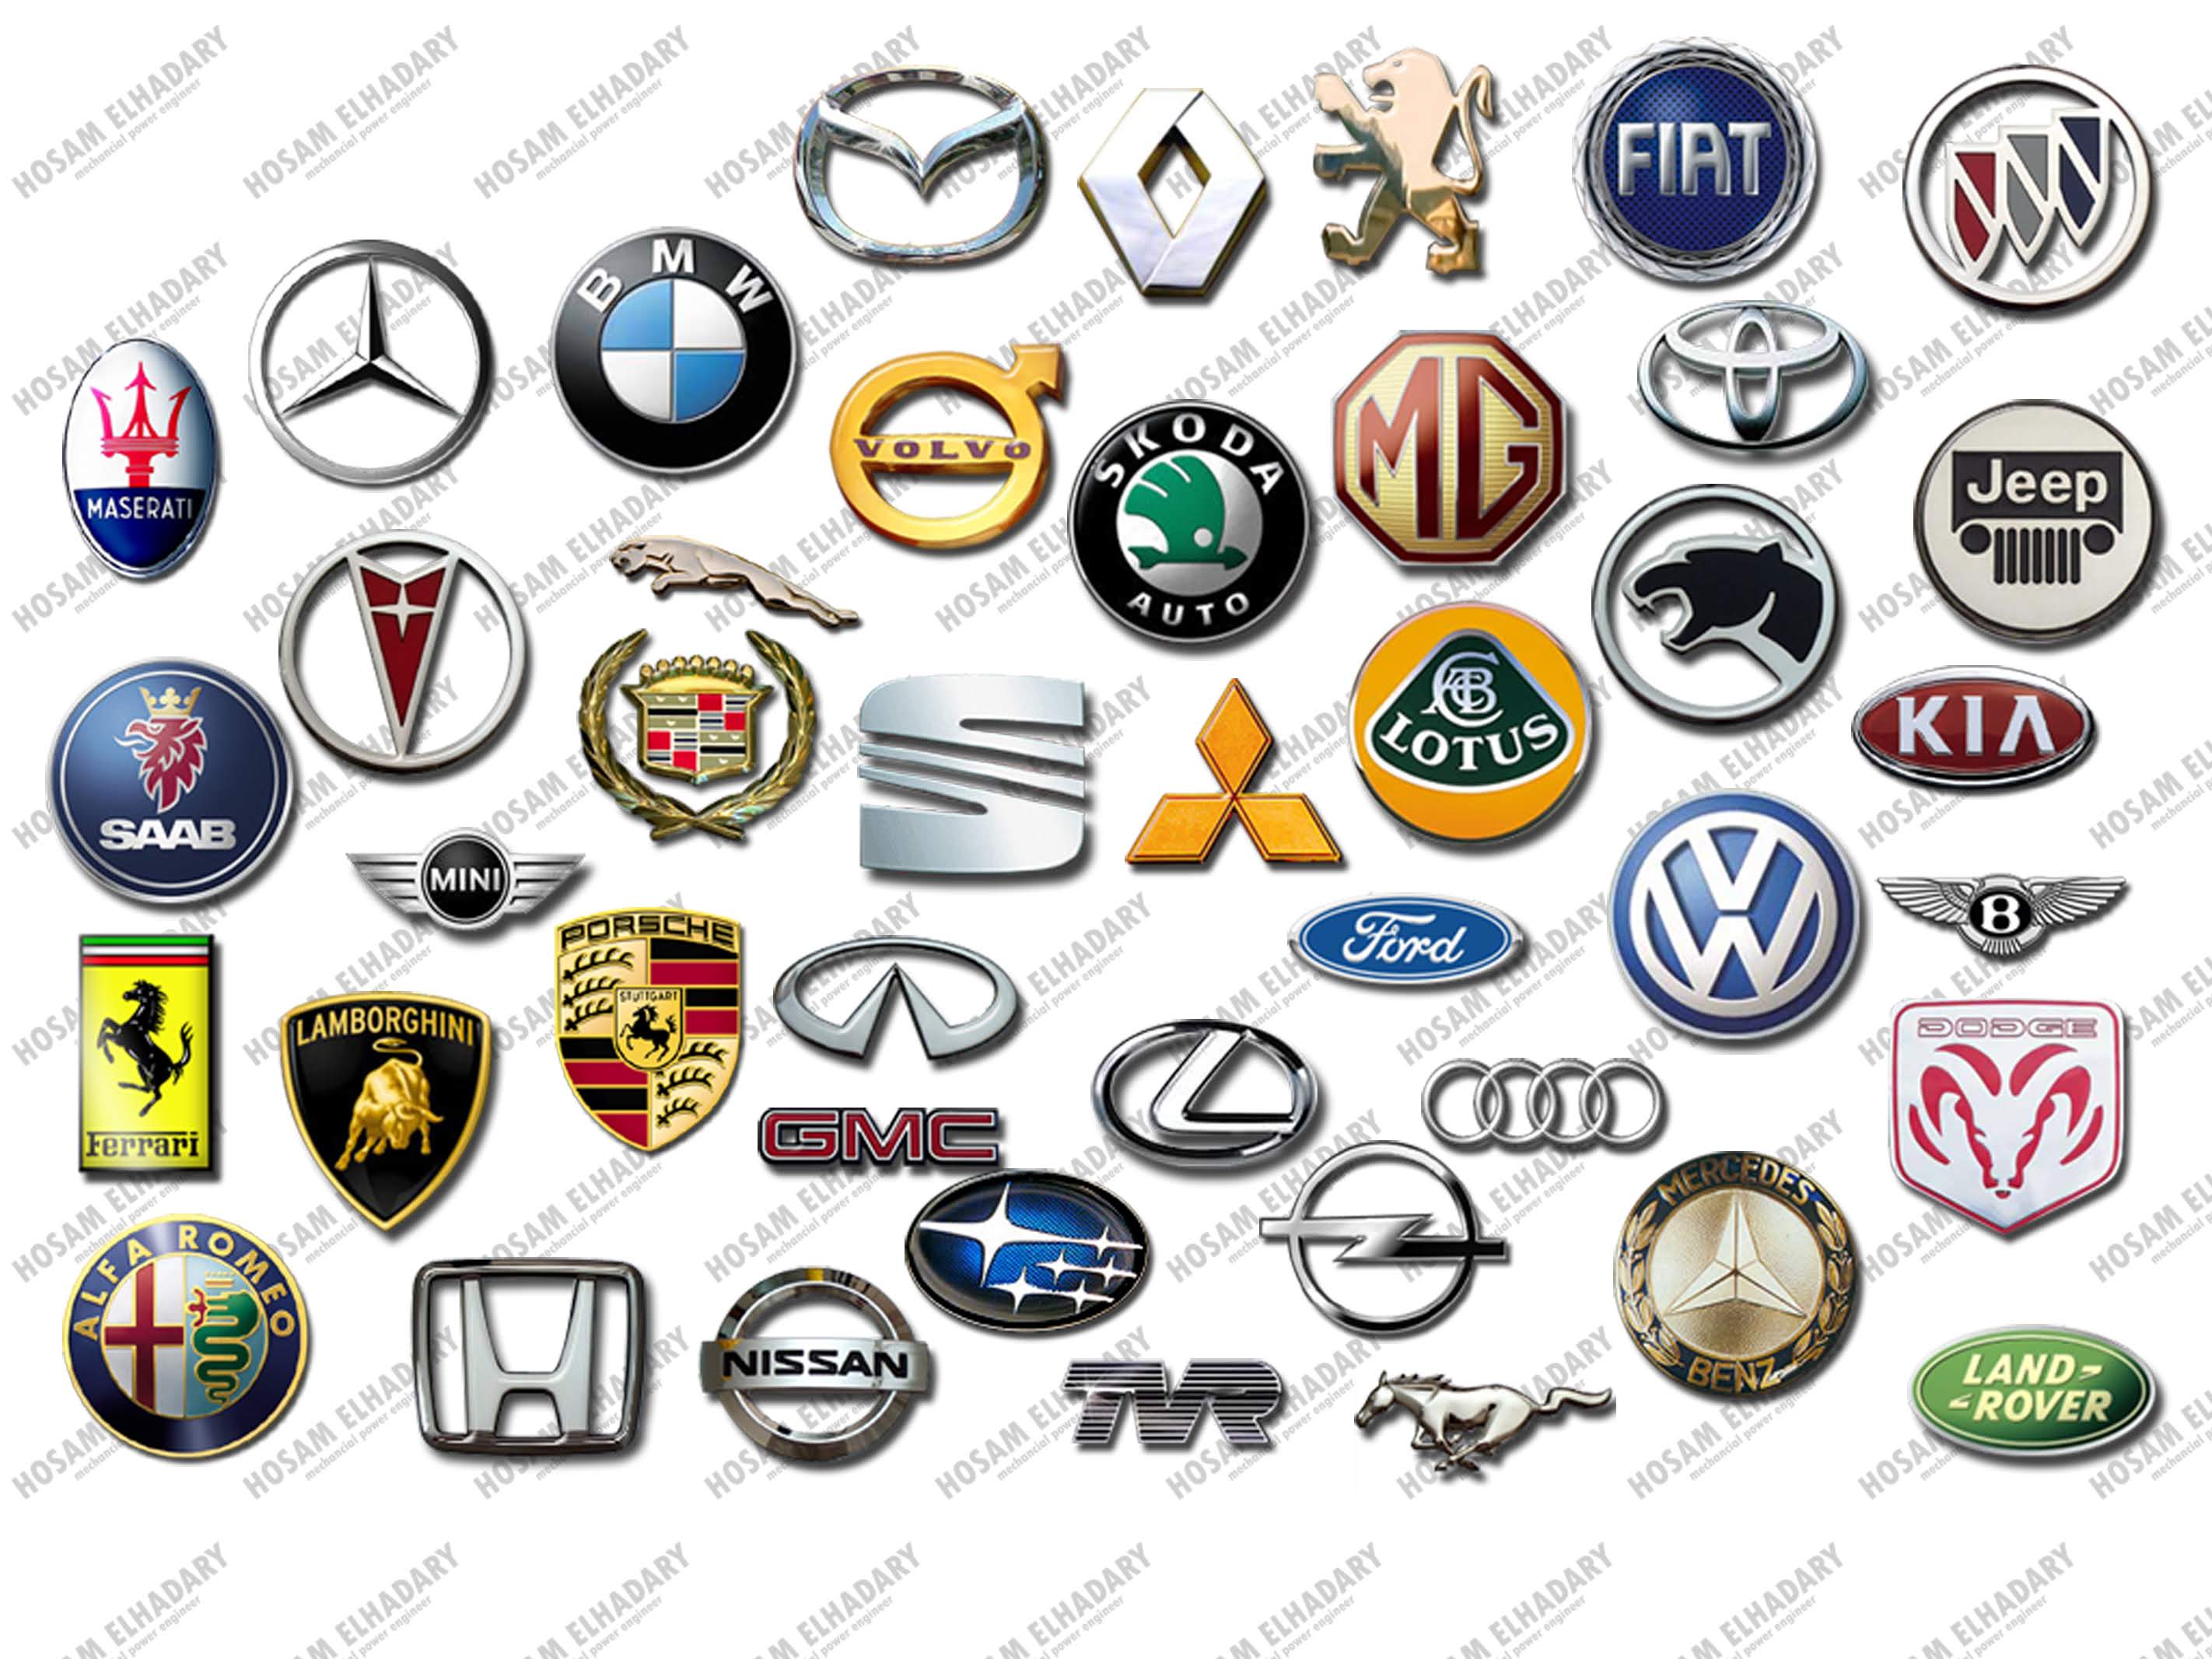 All Car Symbols And Names In The World